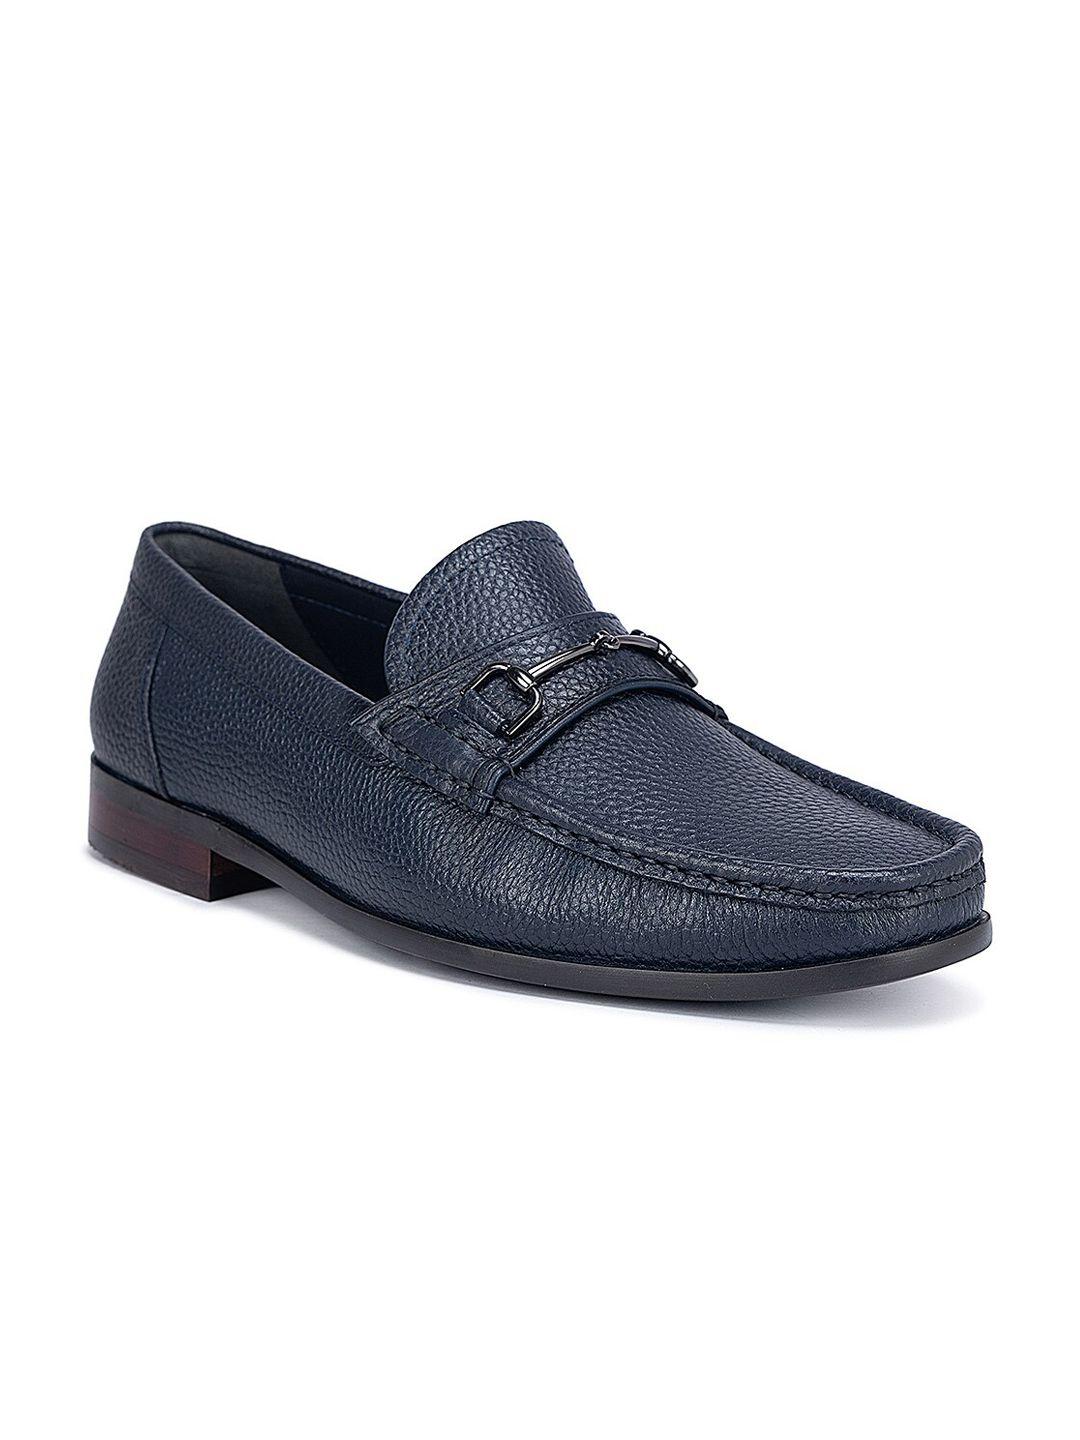 rosso-brunello-men-leather-formal-loafers